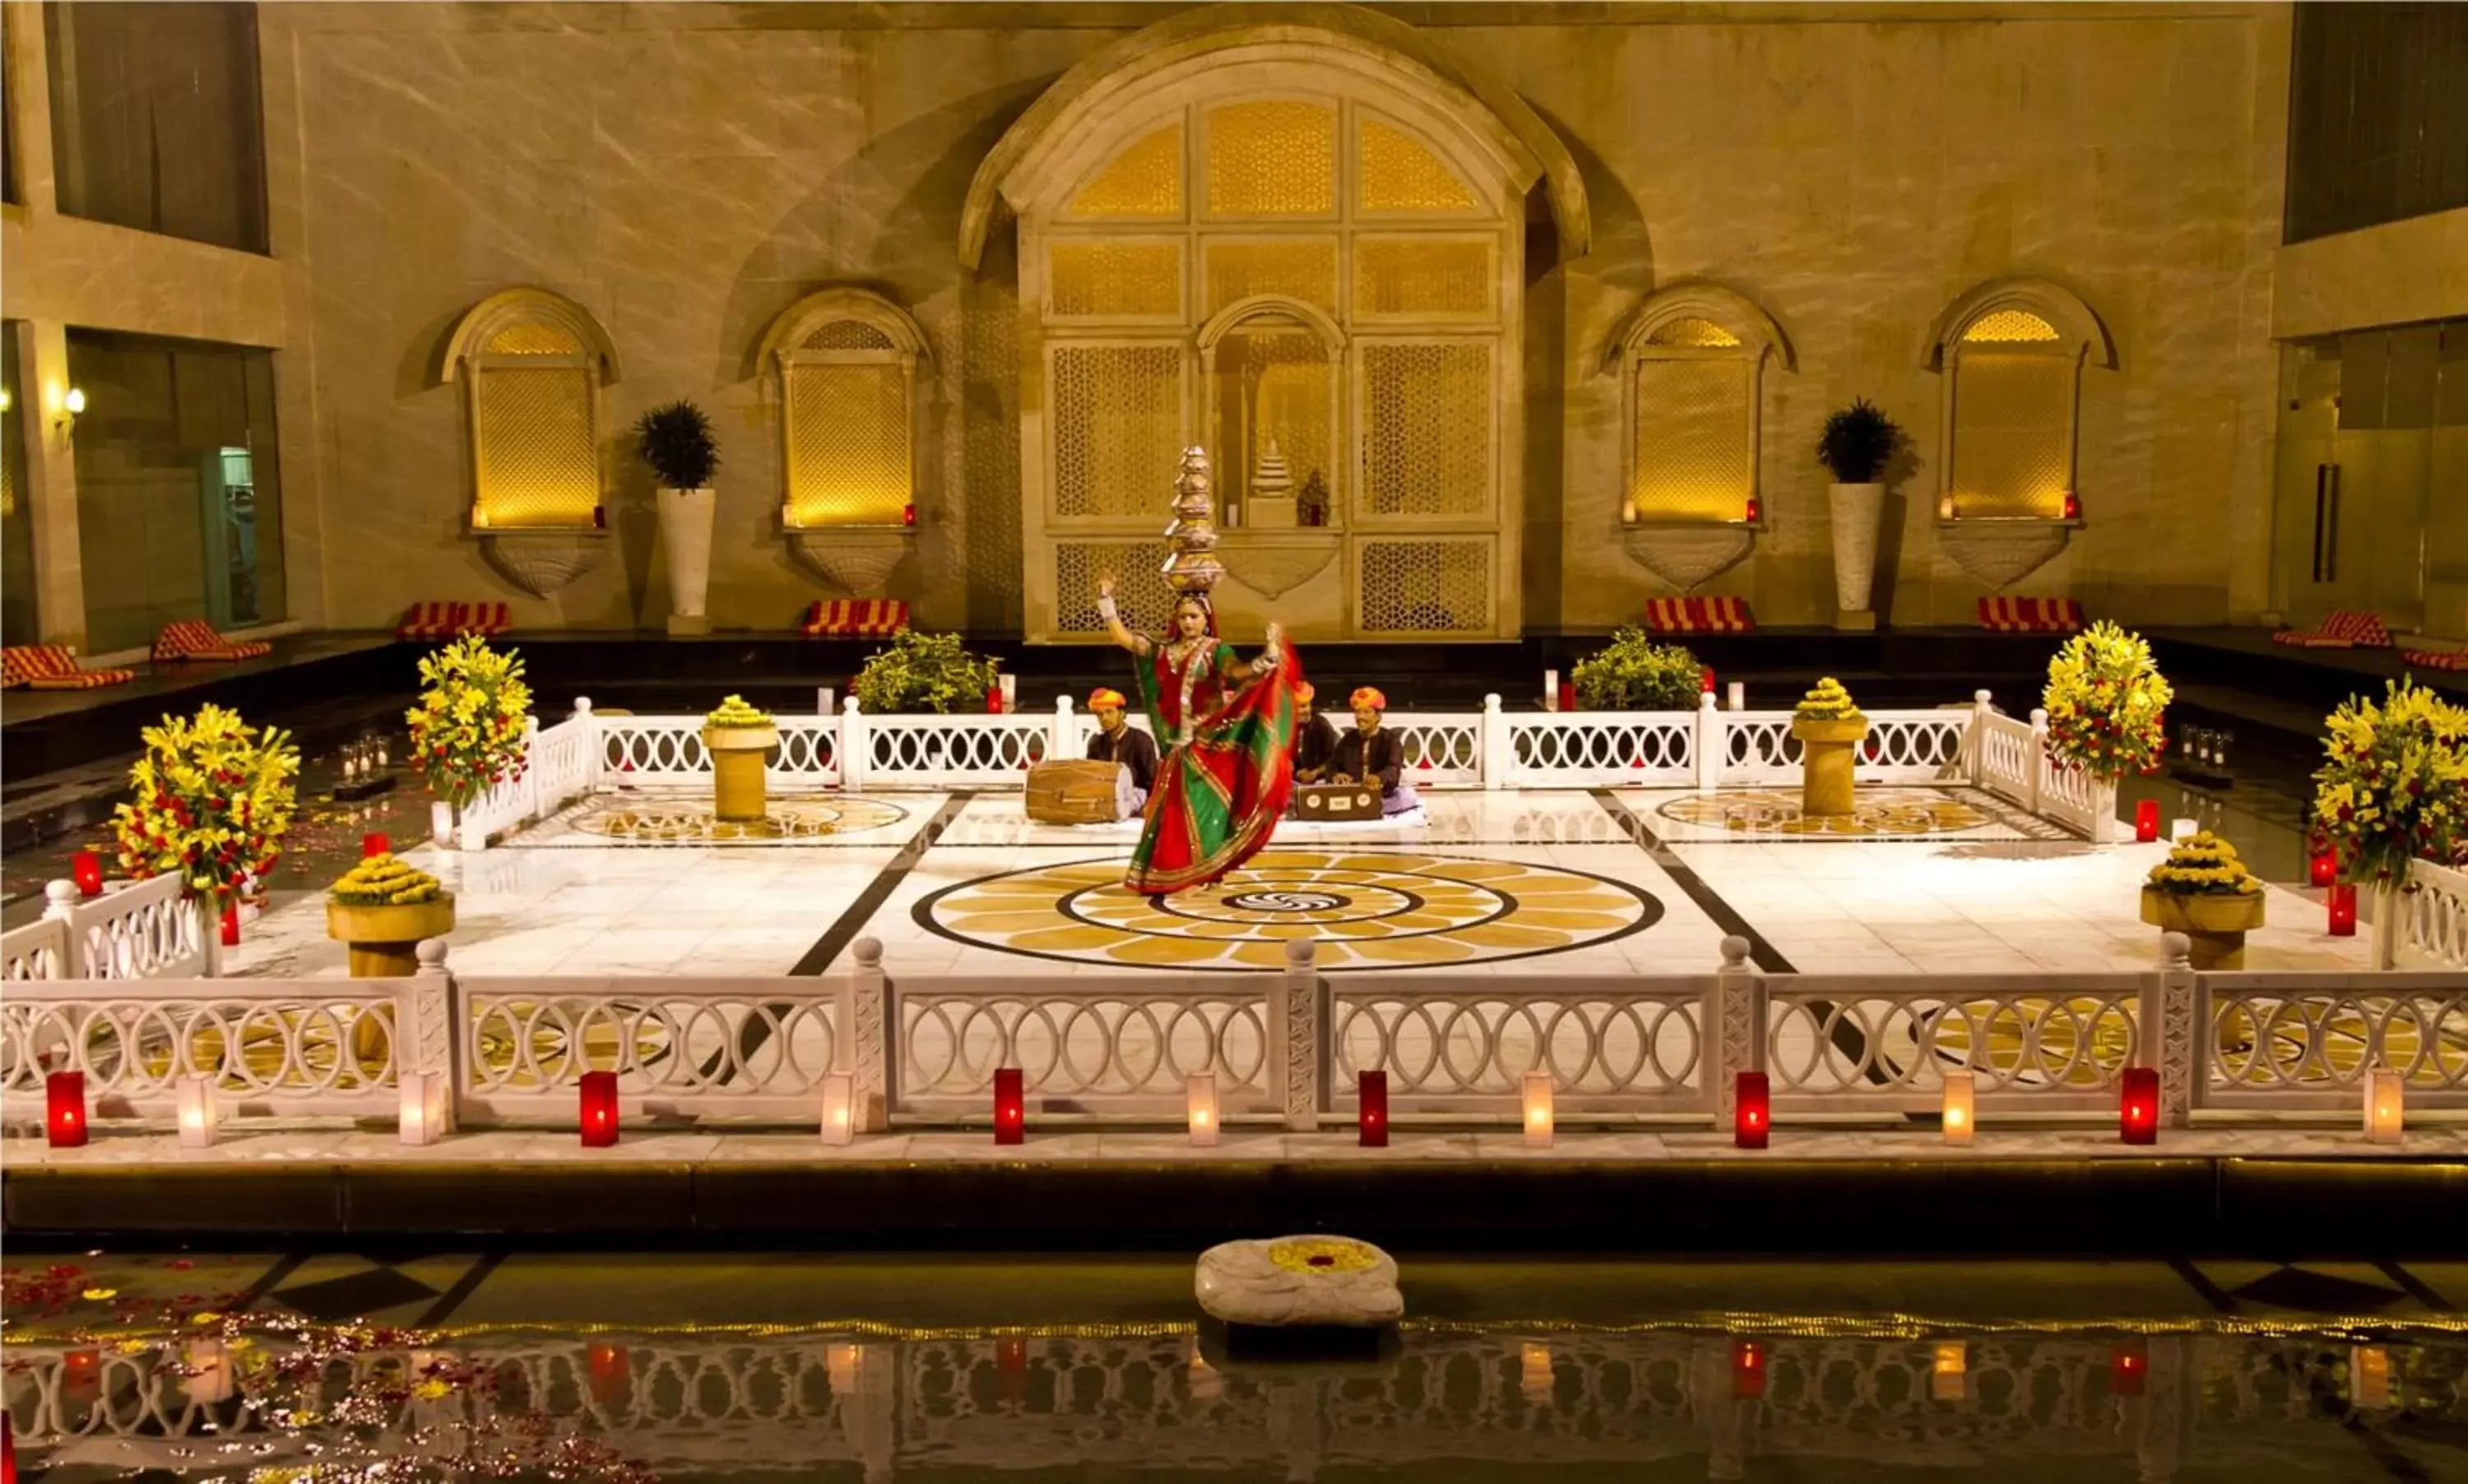 Evening entertainment in The Lalit Jaipur